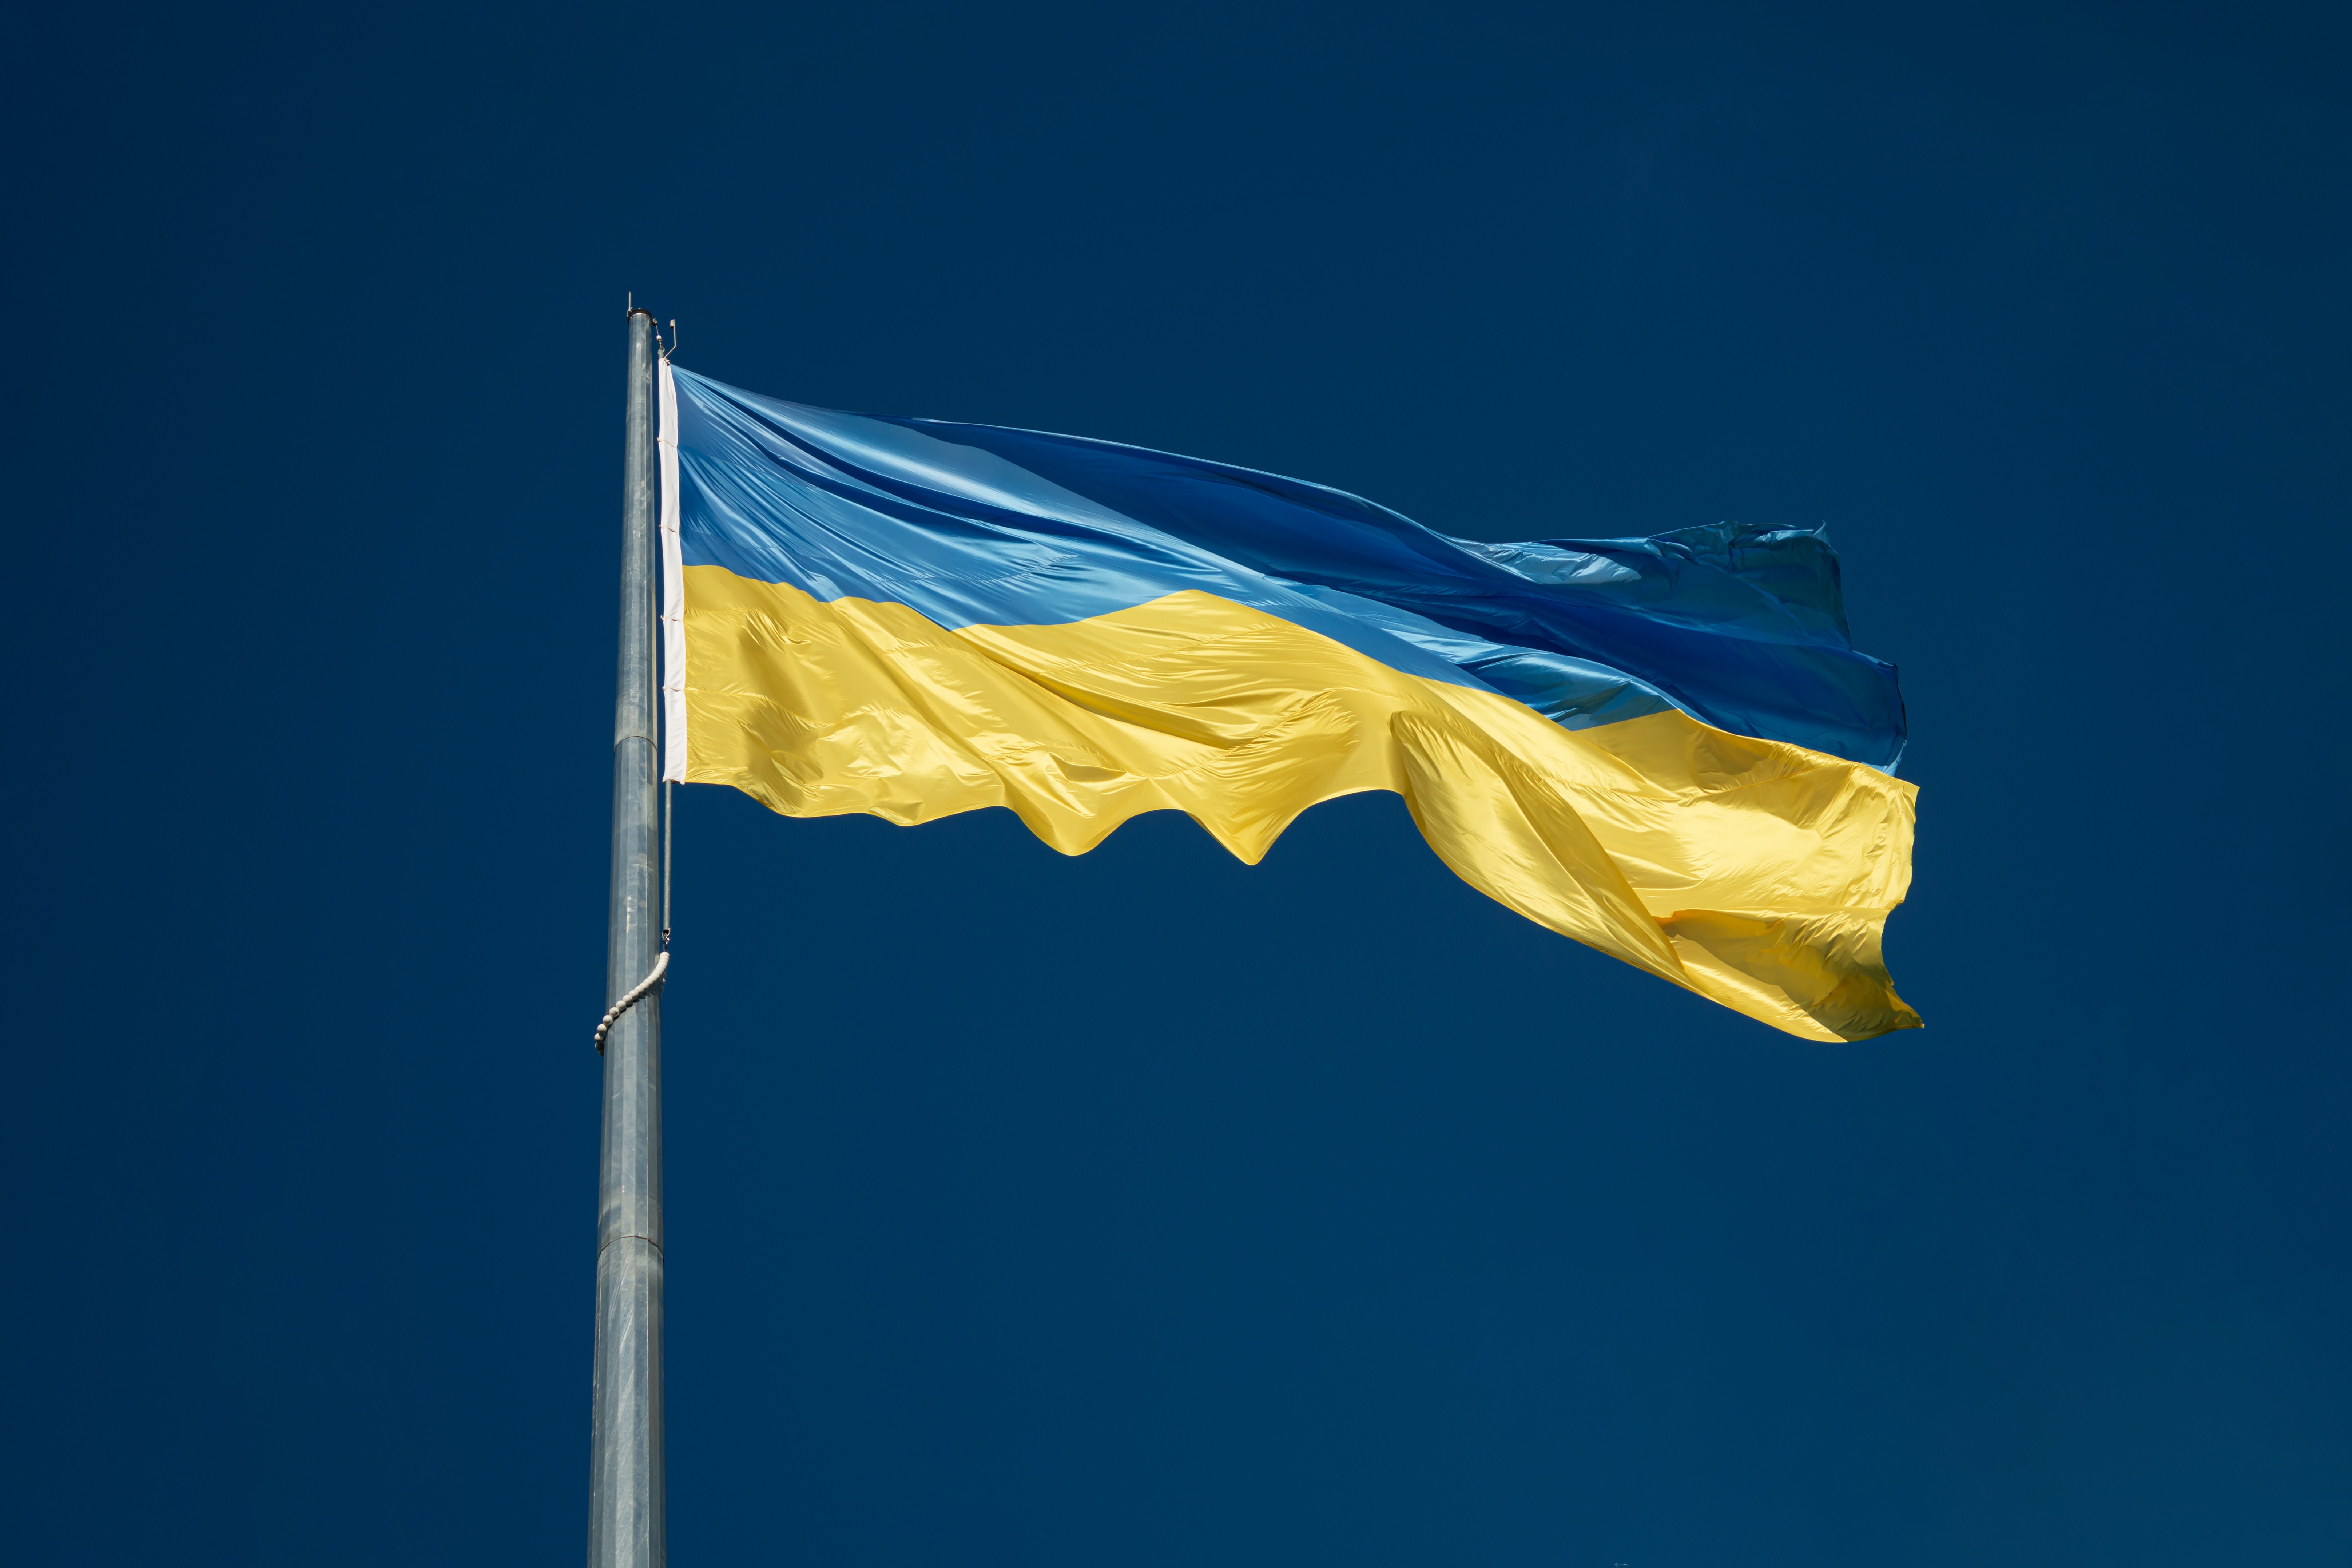 US: Ukraine has right to keep on protecting its sovereign land